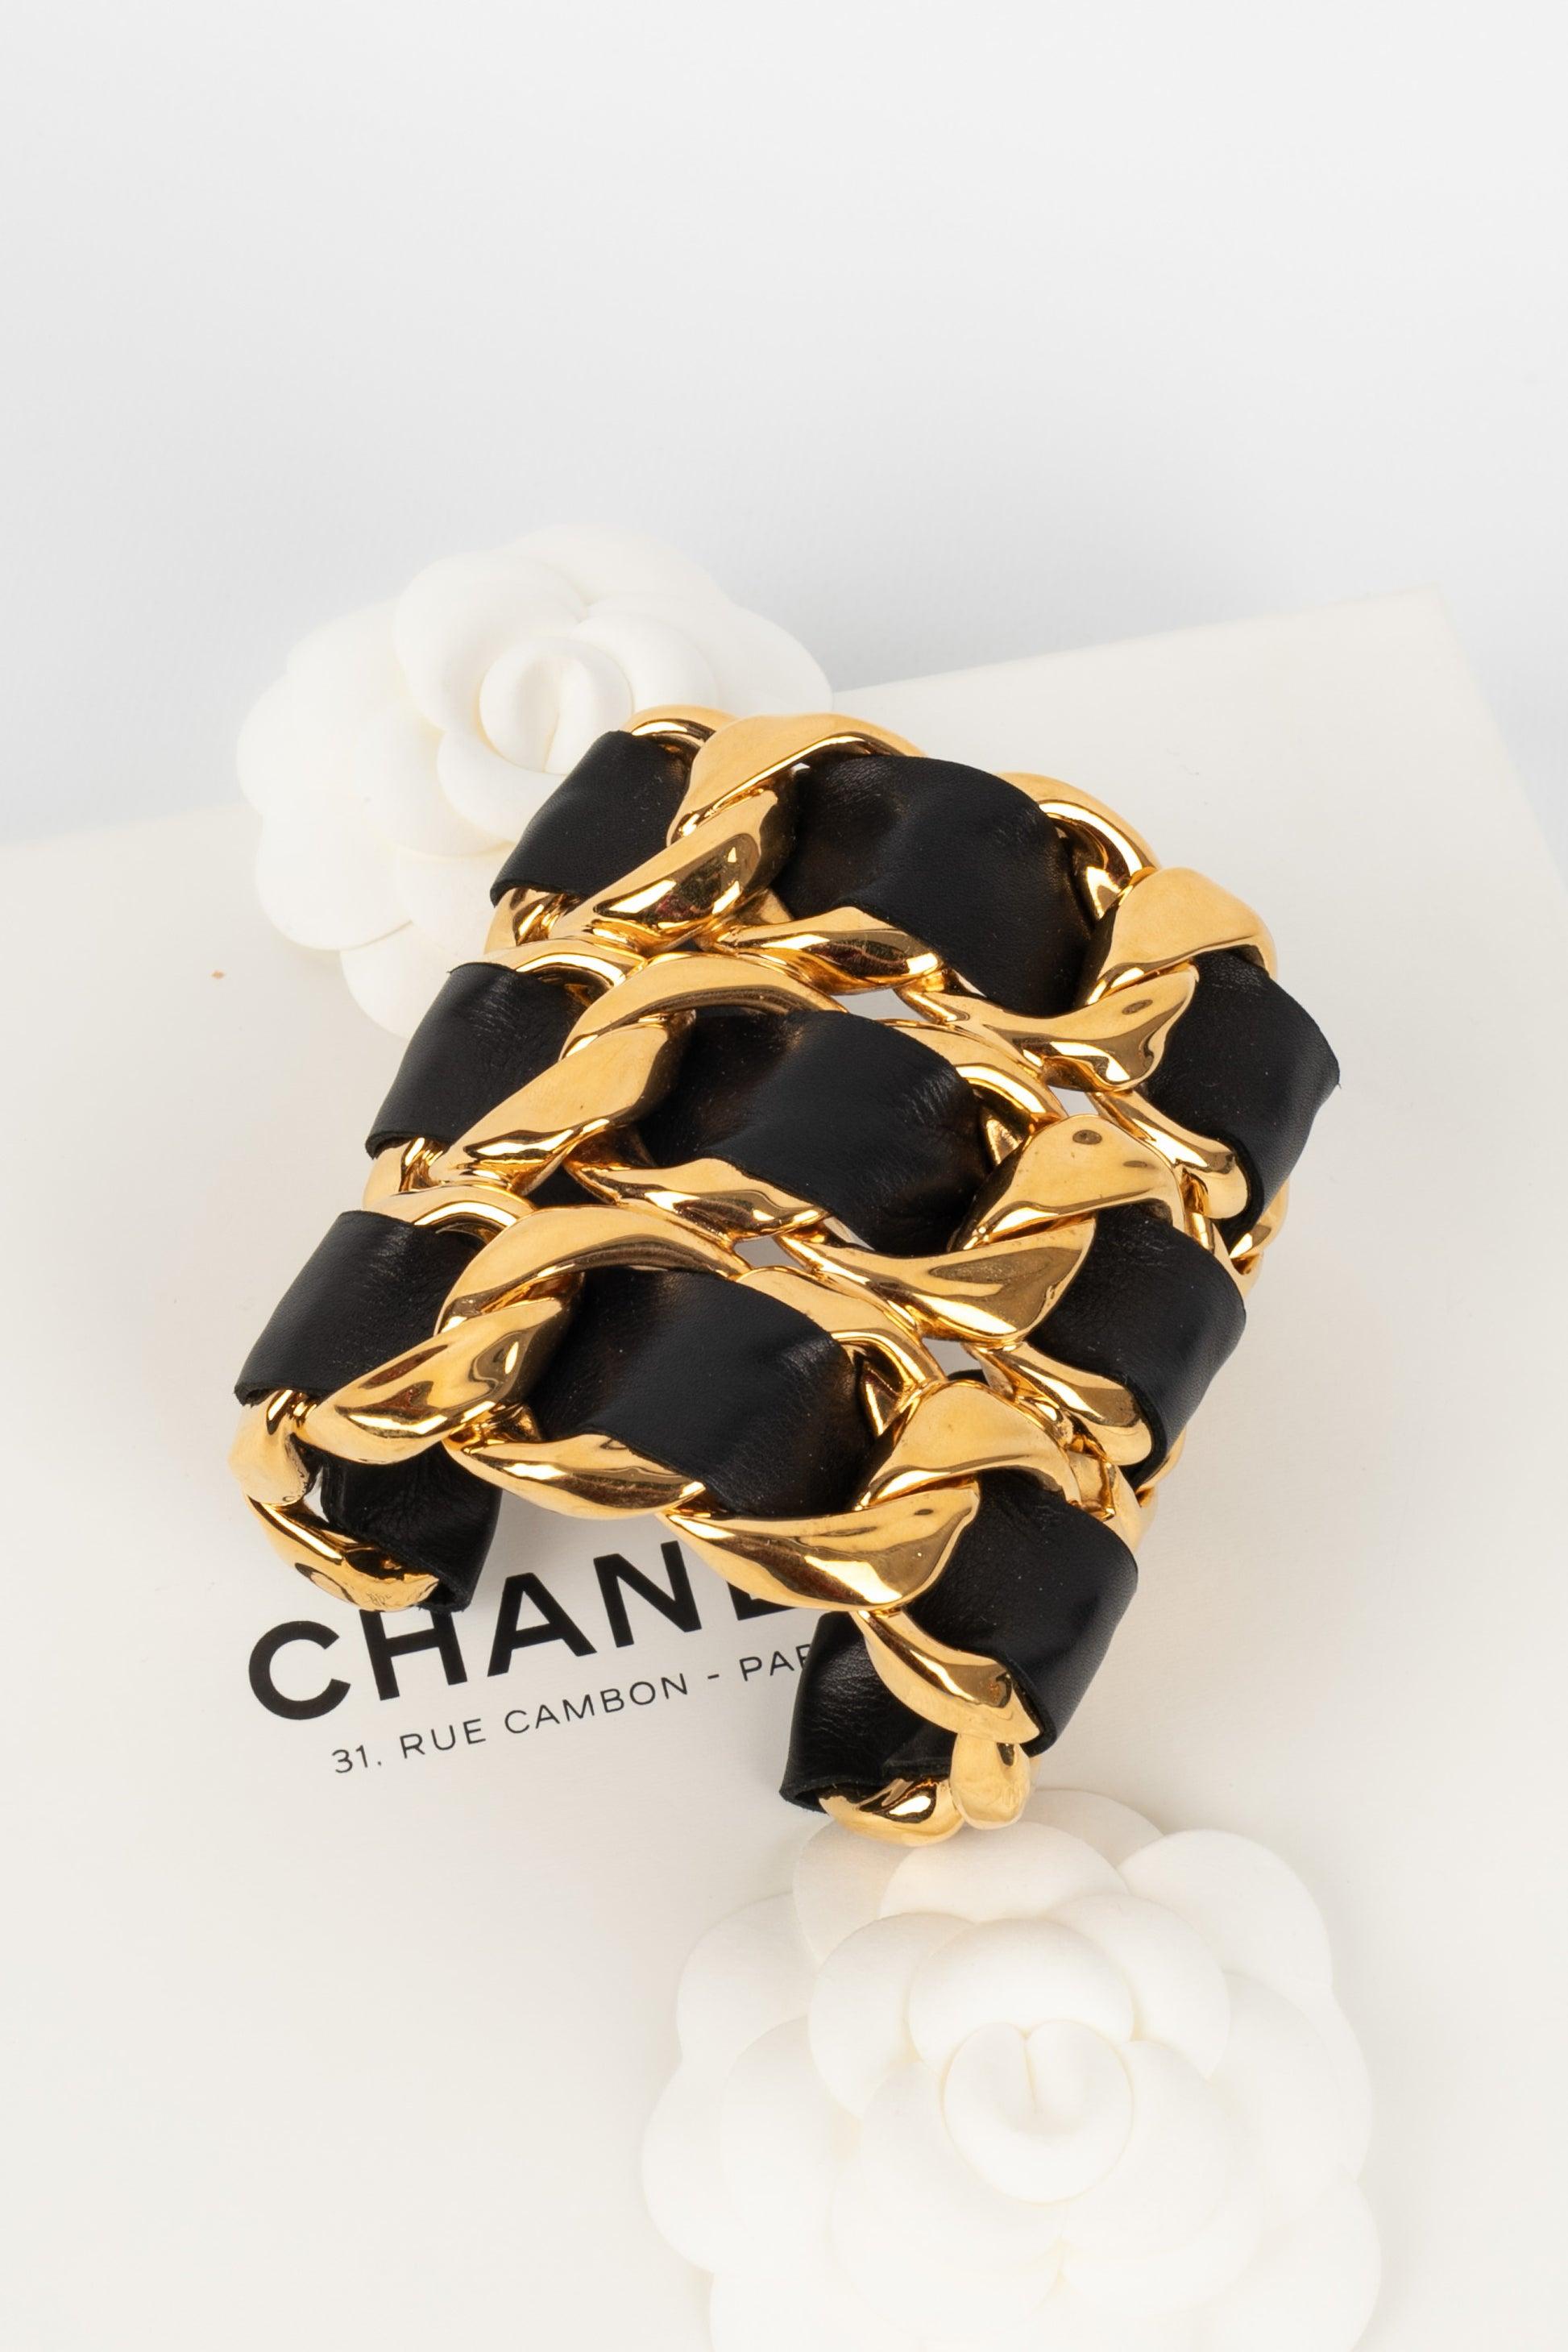 Chanel Cuff Bracelet in Golden Metal with Black Leather, 1980s For Sale 4